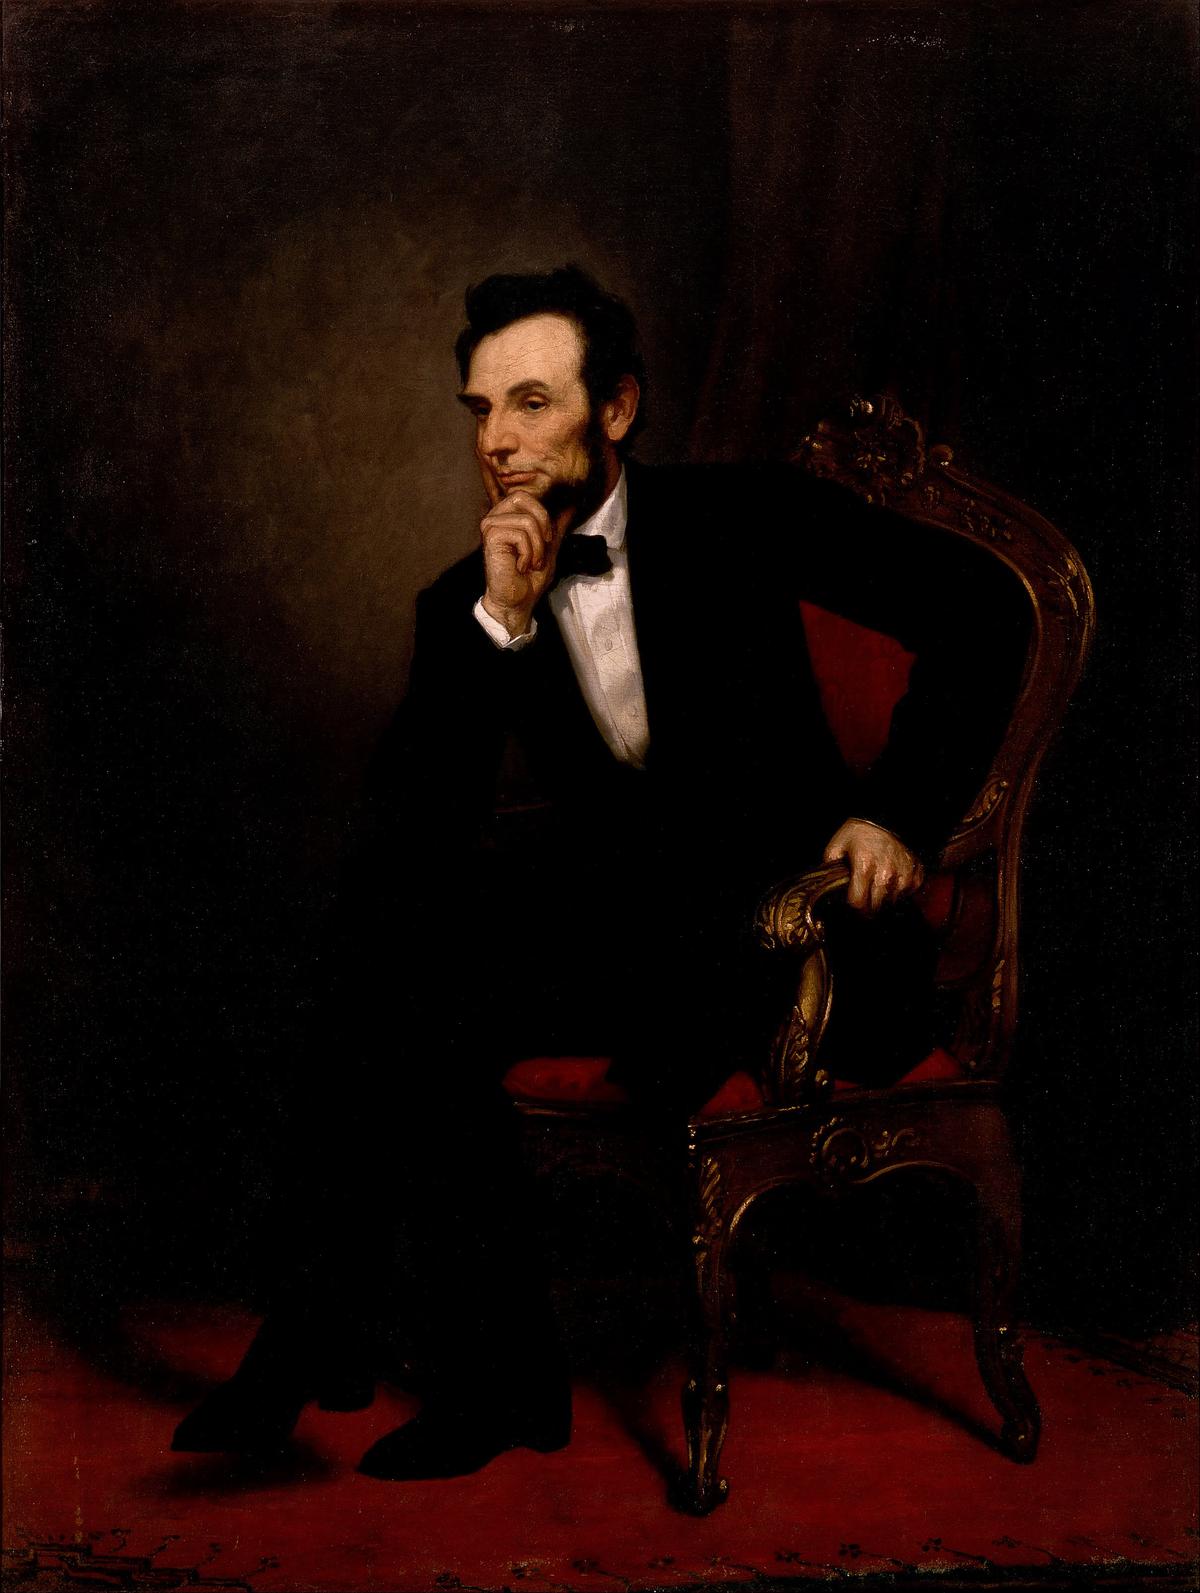 “Abraham Lincoln” by George Peter Alexander Healy, 1869. Oil on canvas. White House. (Public Domain)